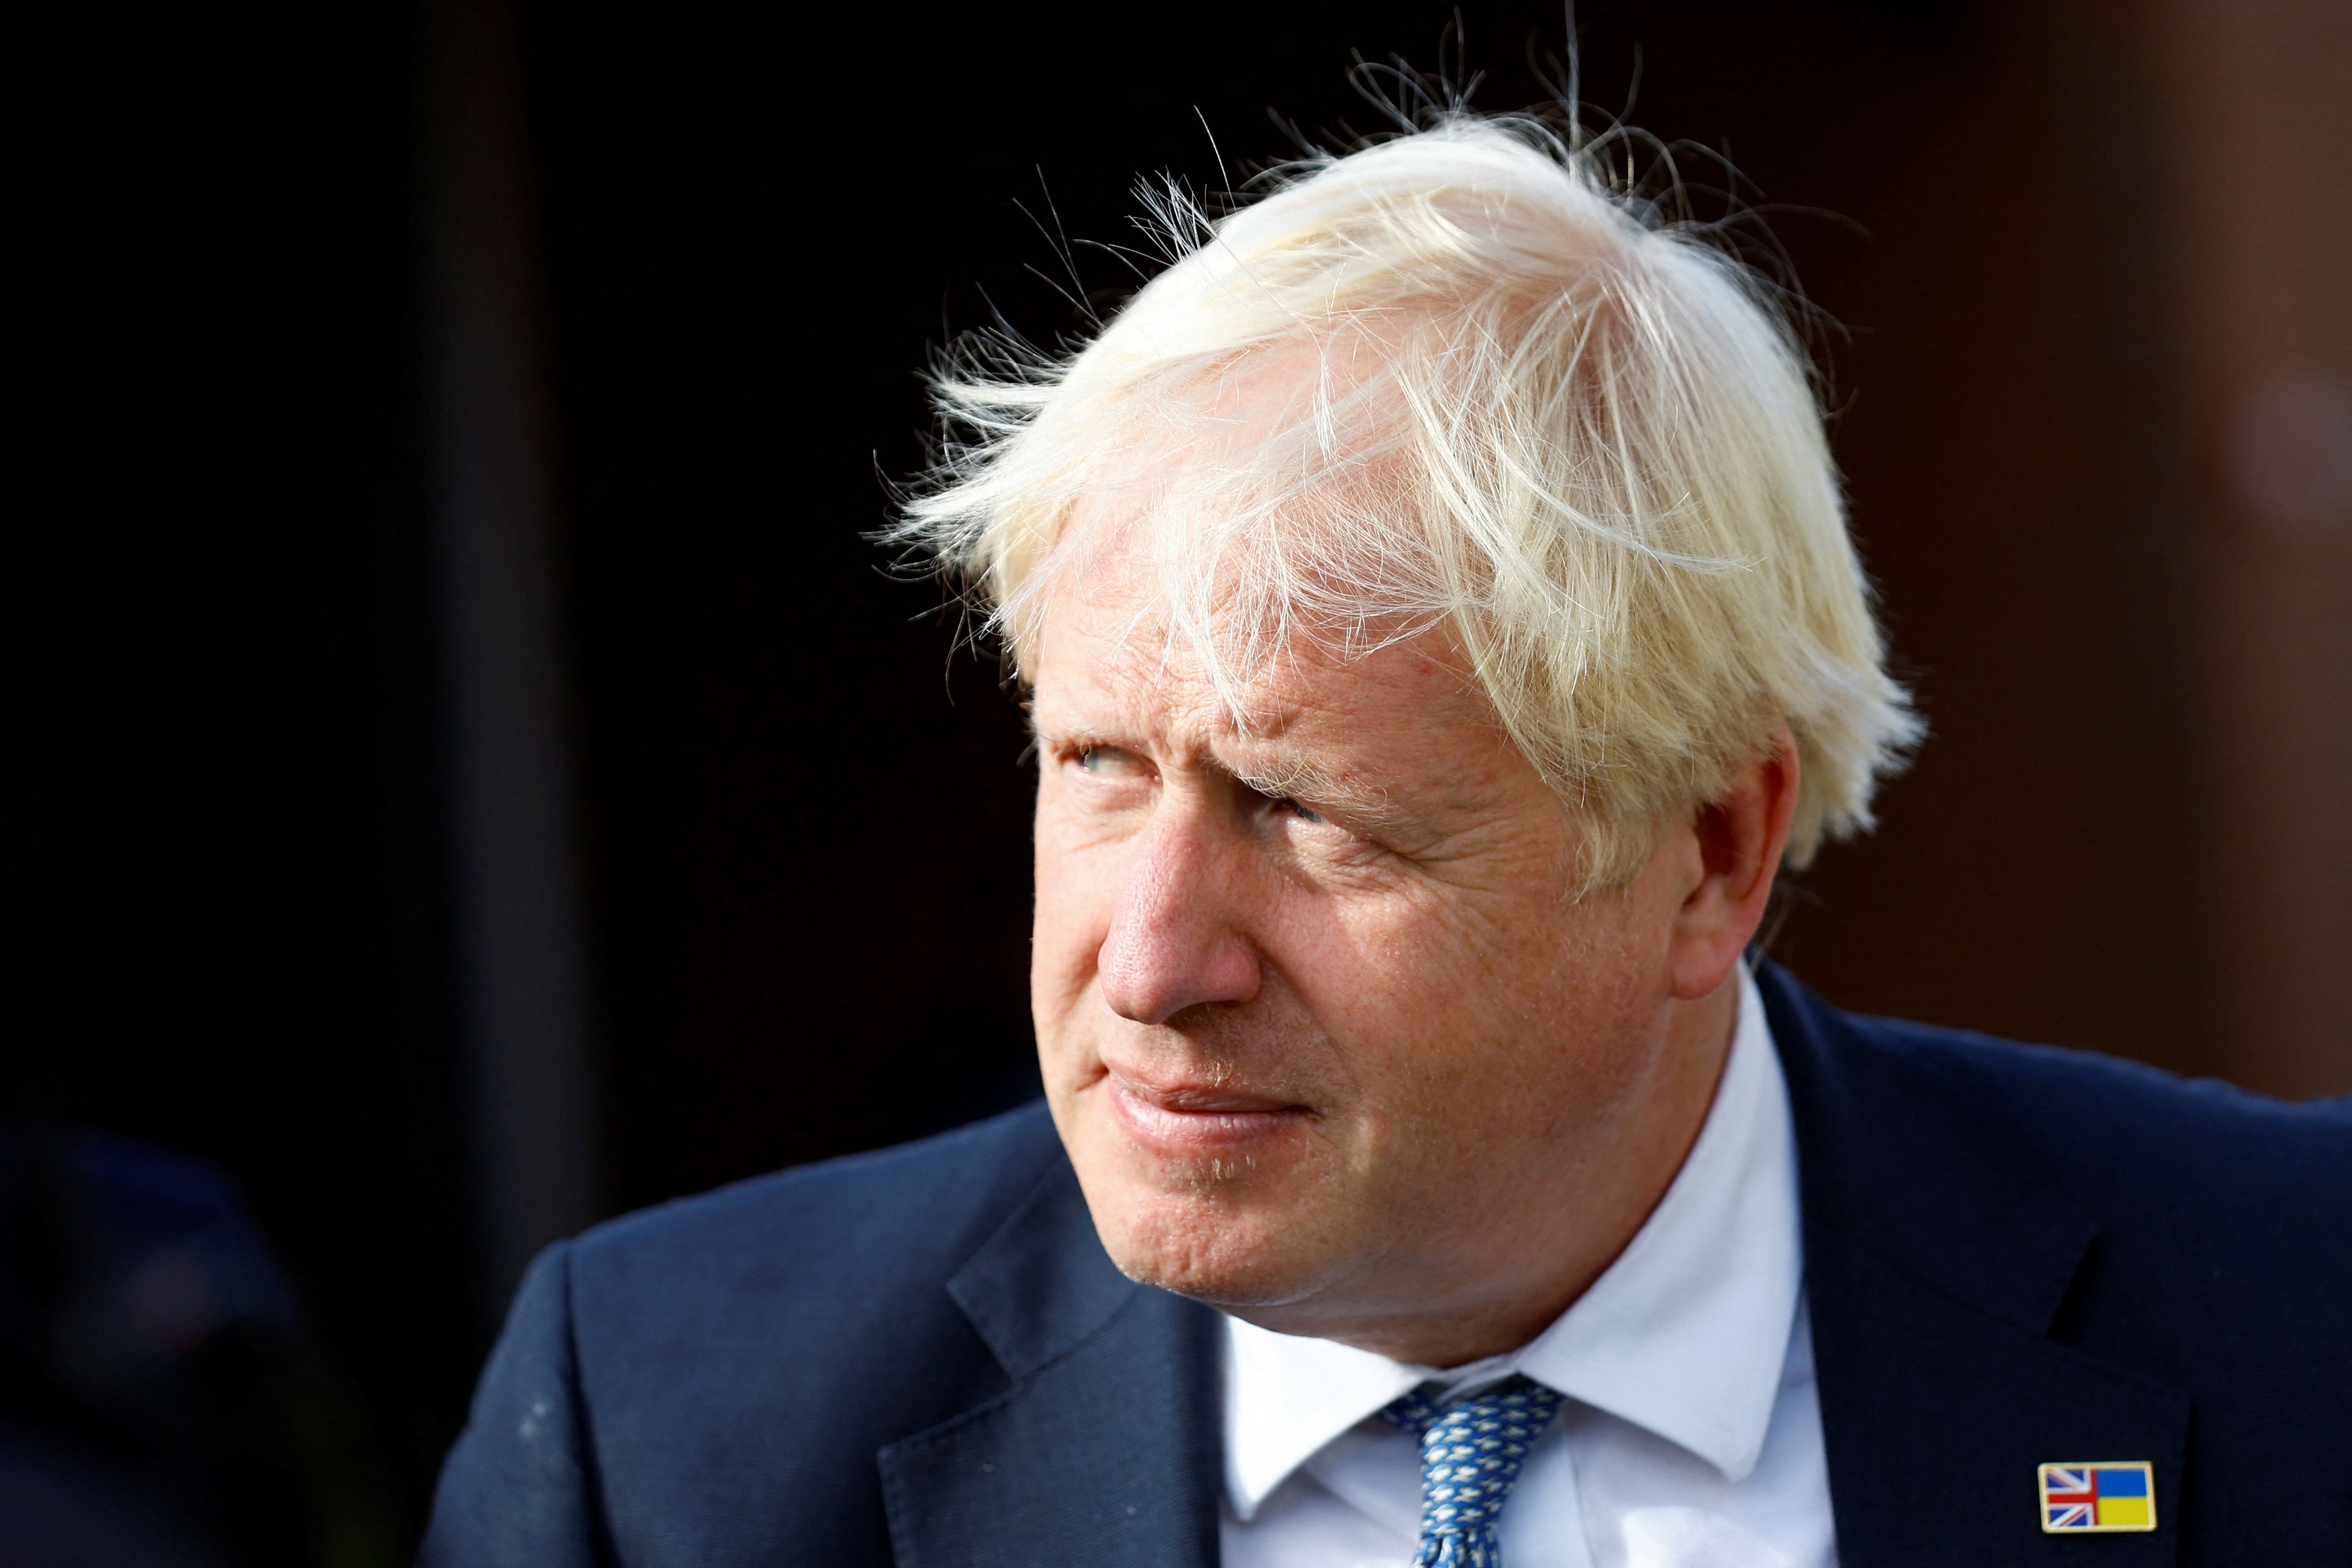 I met no Tory voters in Uxbridge who are pleased that Johnson has left, writes Tanya Gold